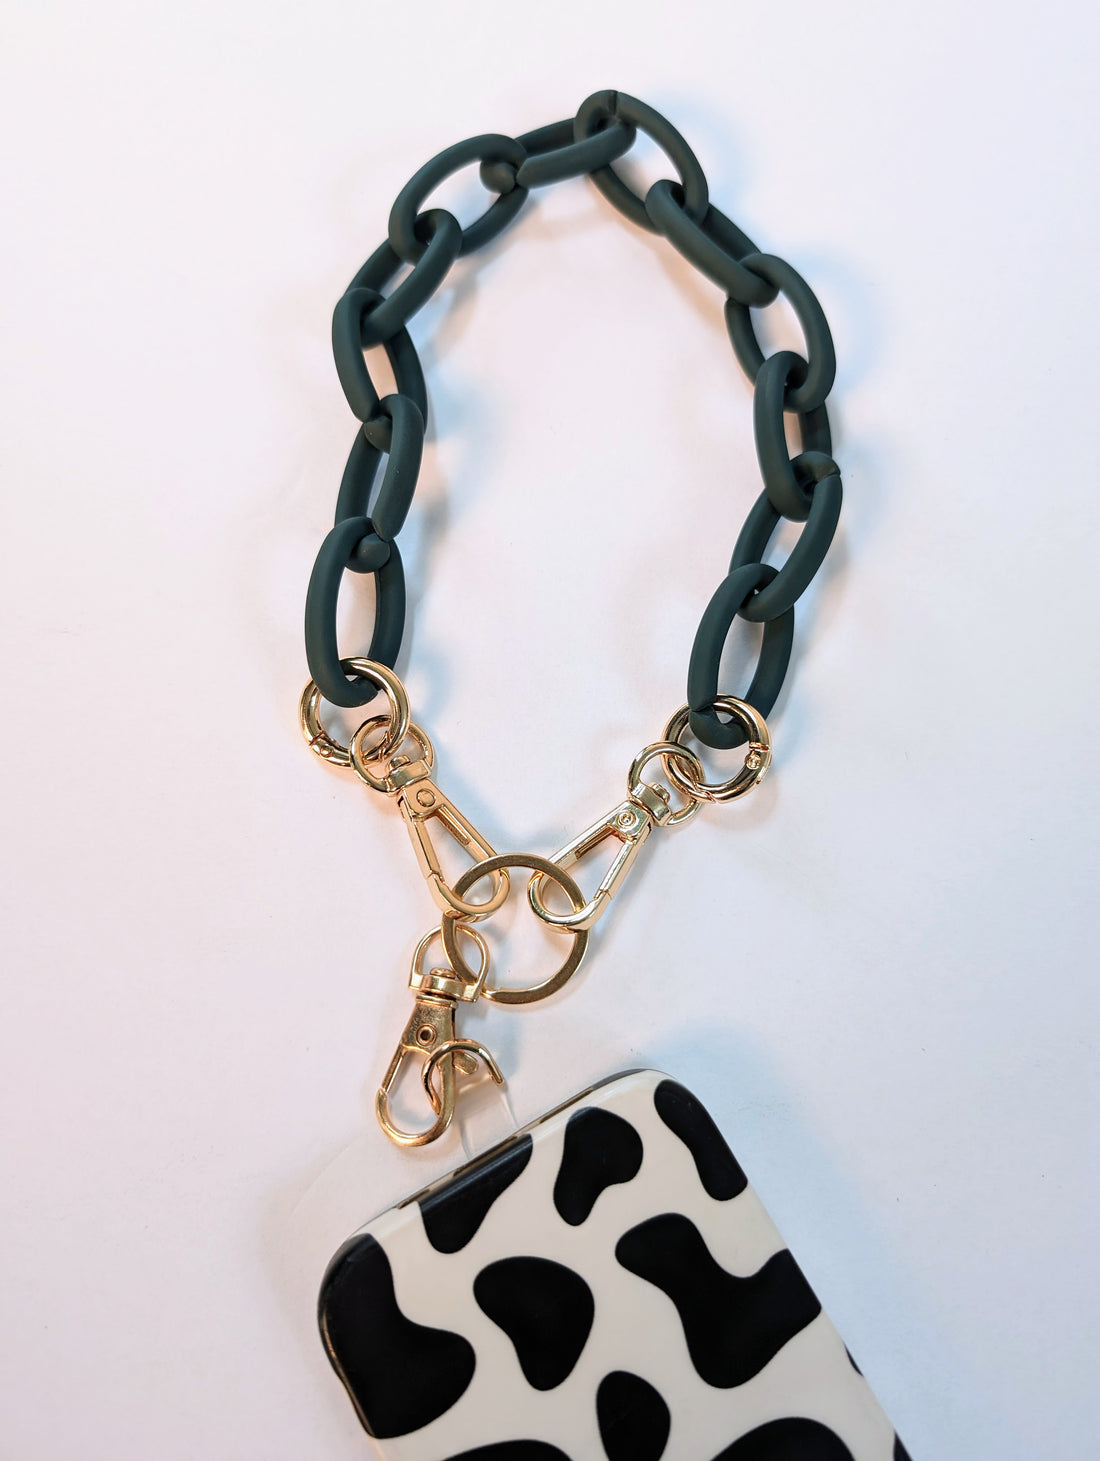 Fall Link Chain Phone or Bag Strap